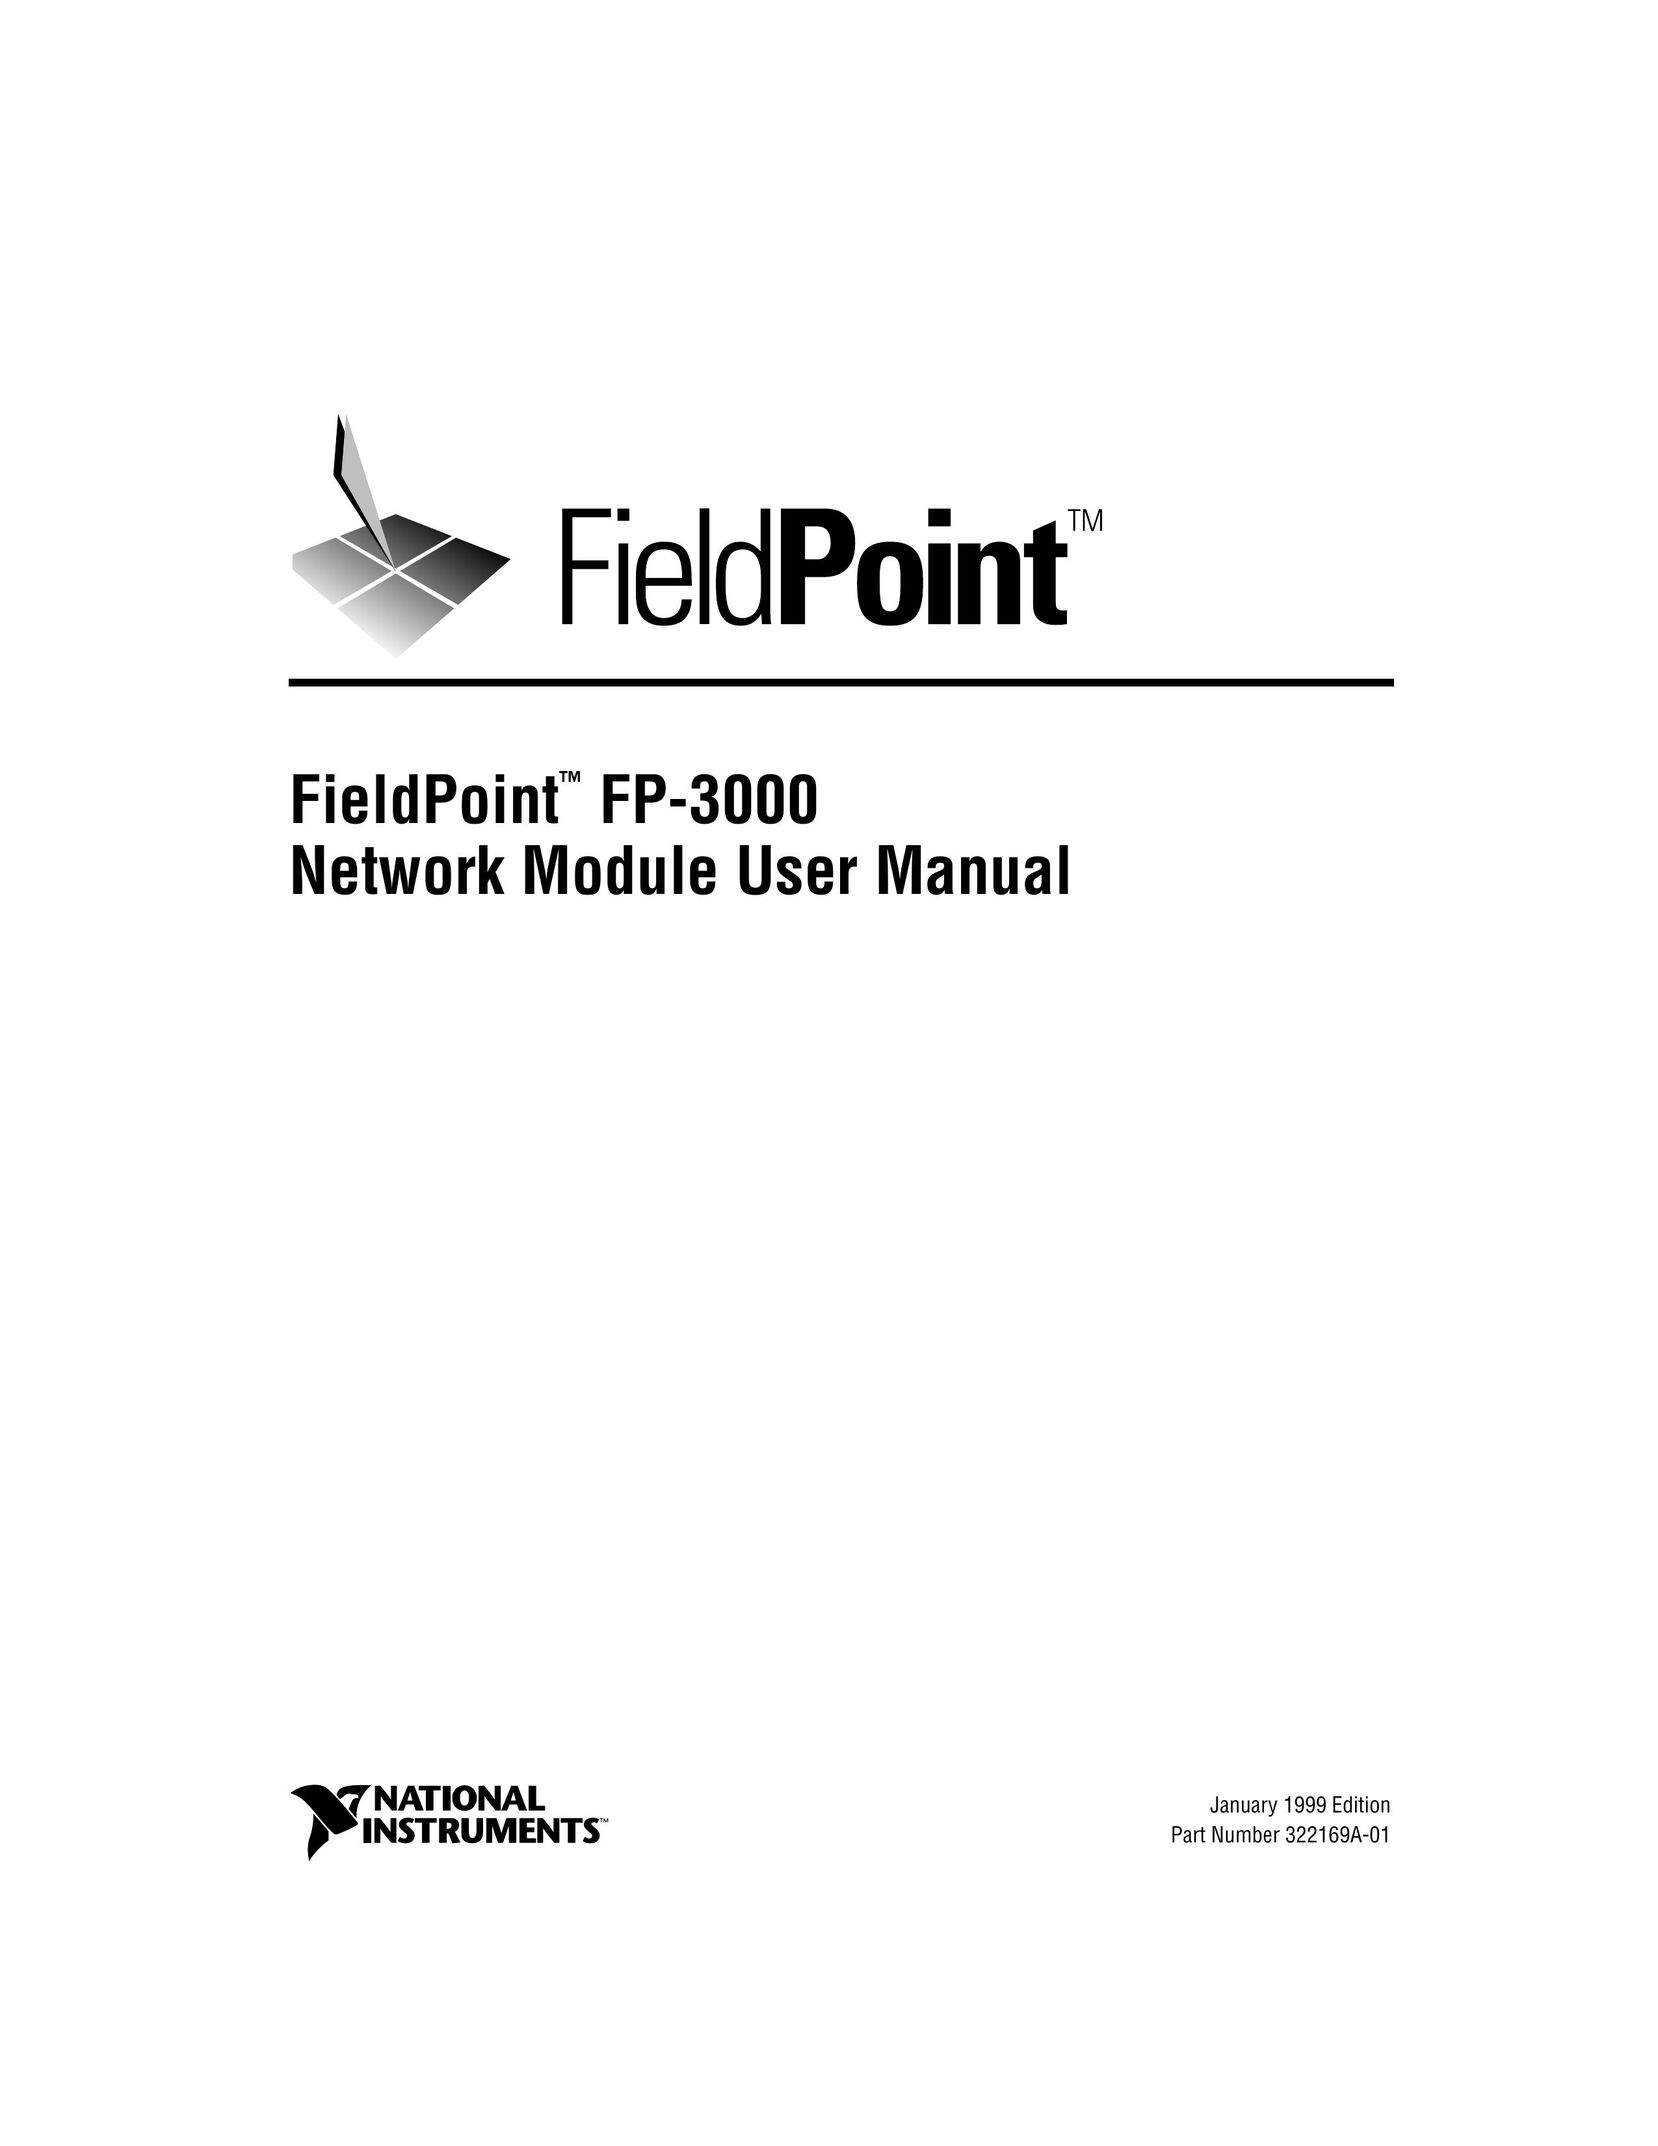 National Instruments FP-3000 Network Card User Manual